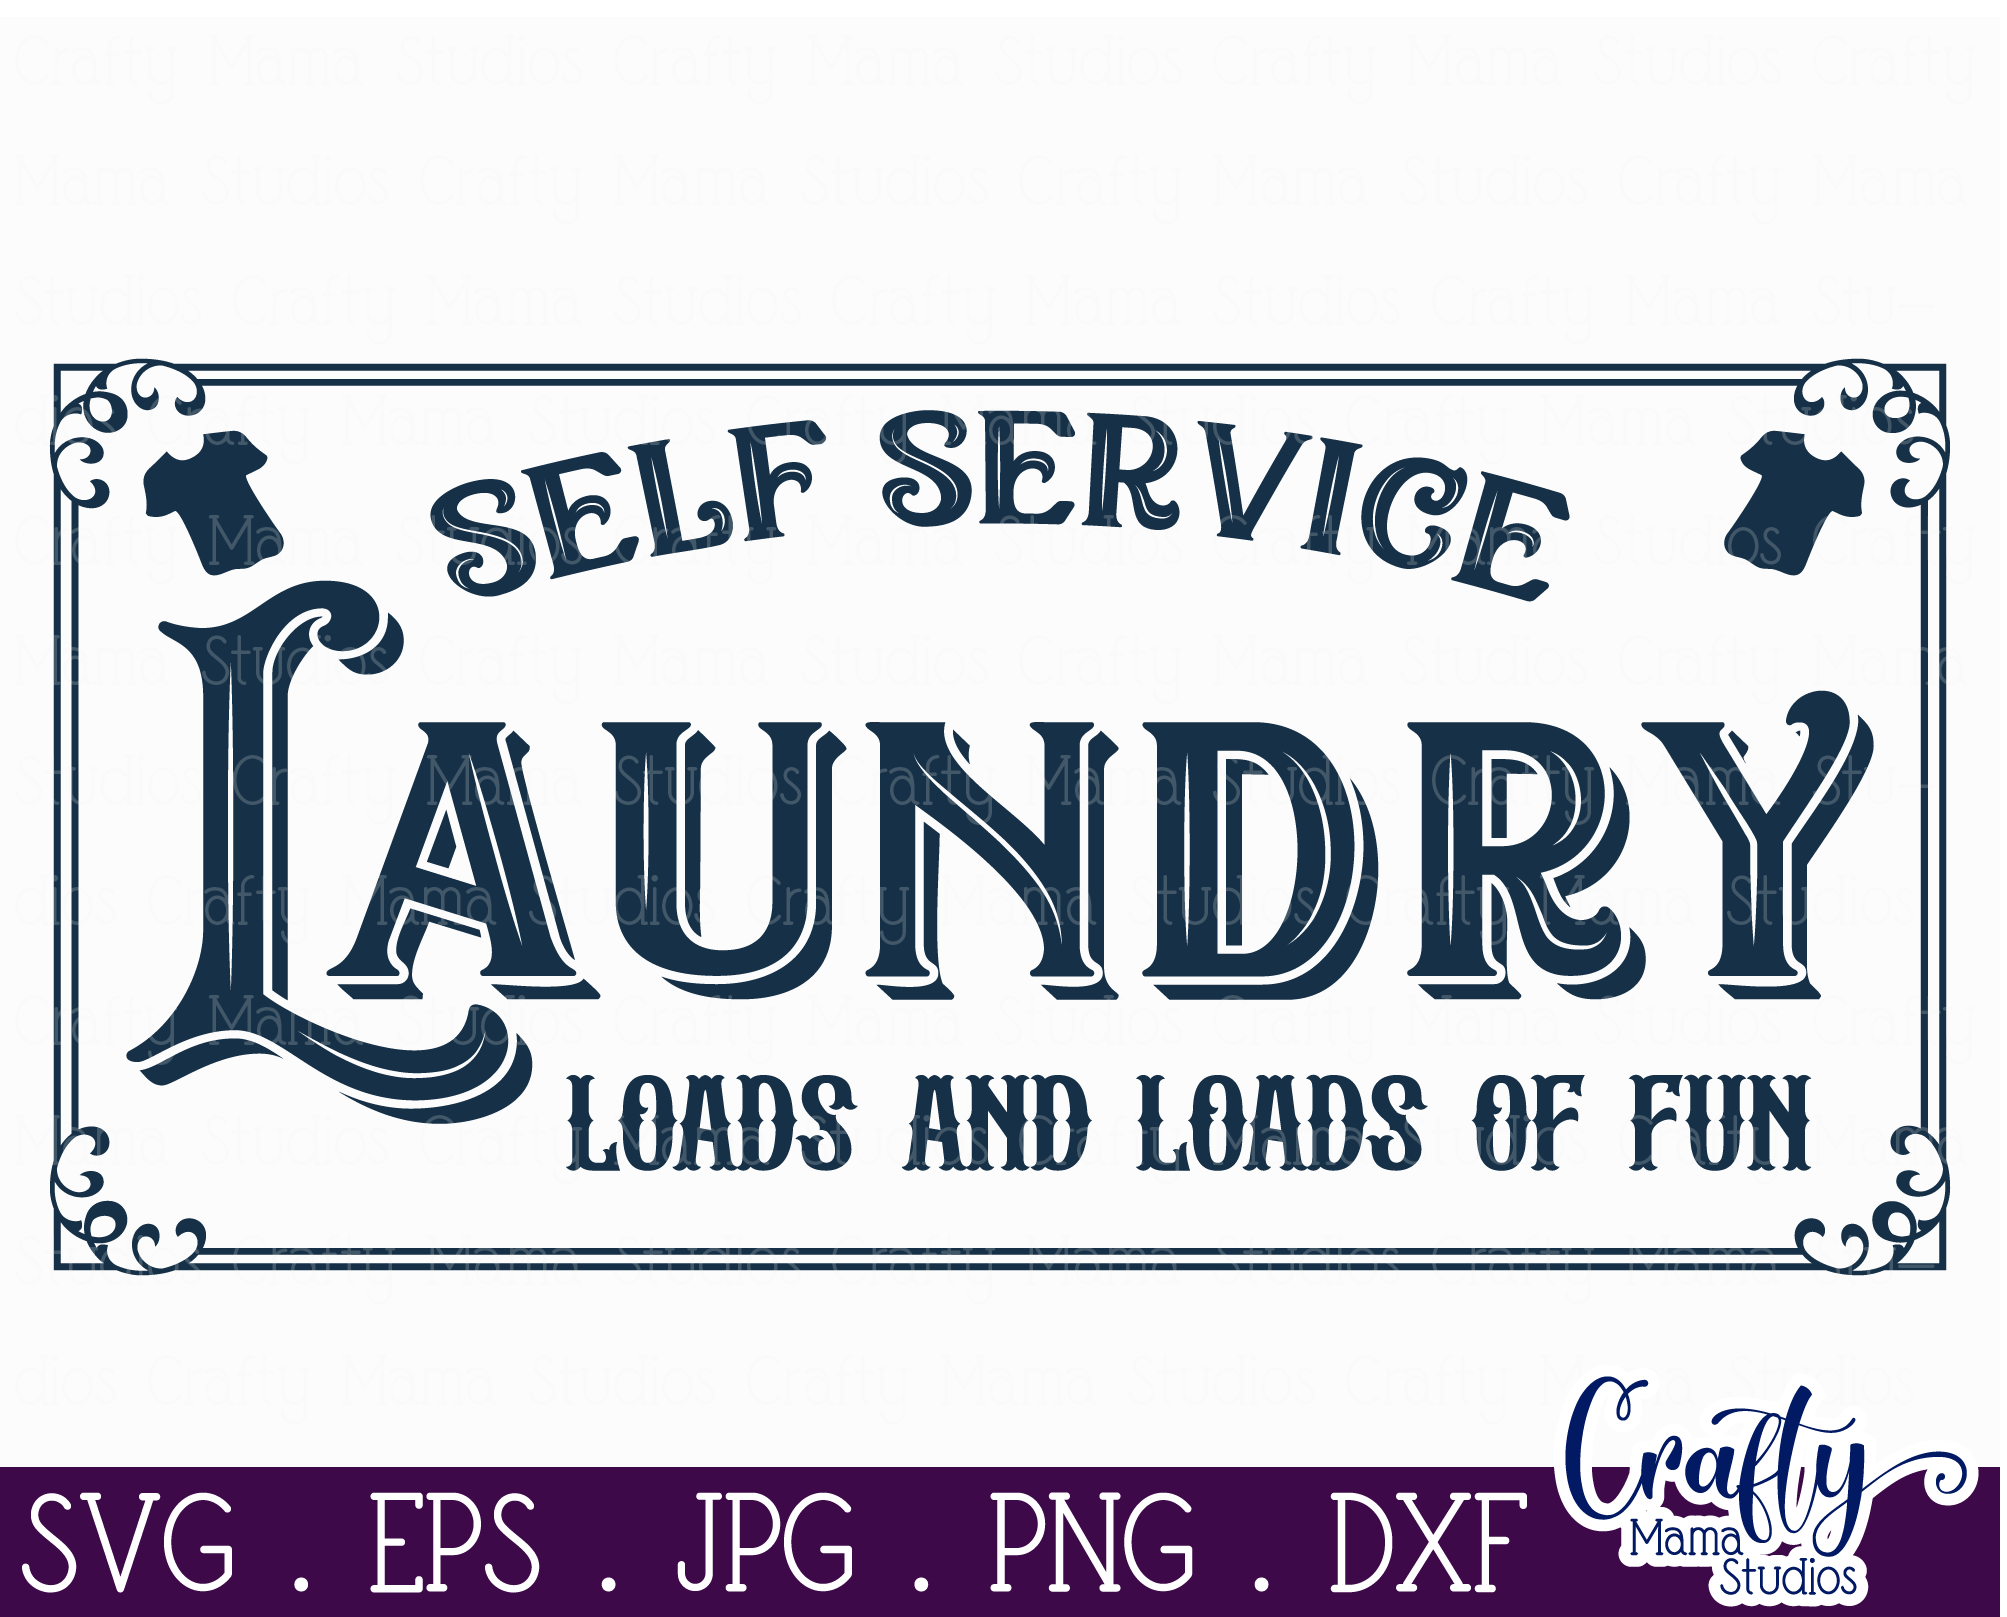 Vintage Farmhouse Home Sign Loads Of Fun Laundry Svg By Crafty Mama Studios Thehungryjpeg